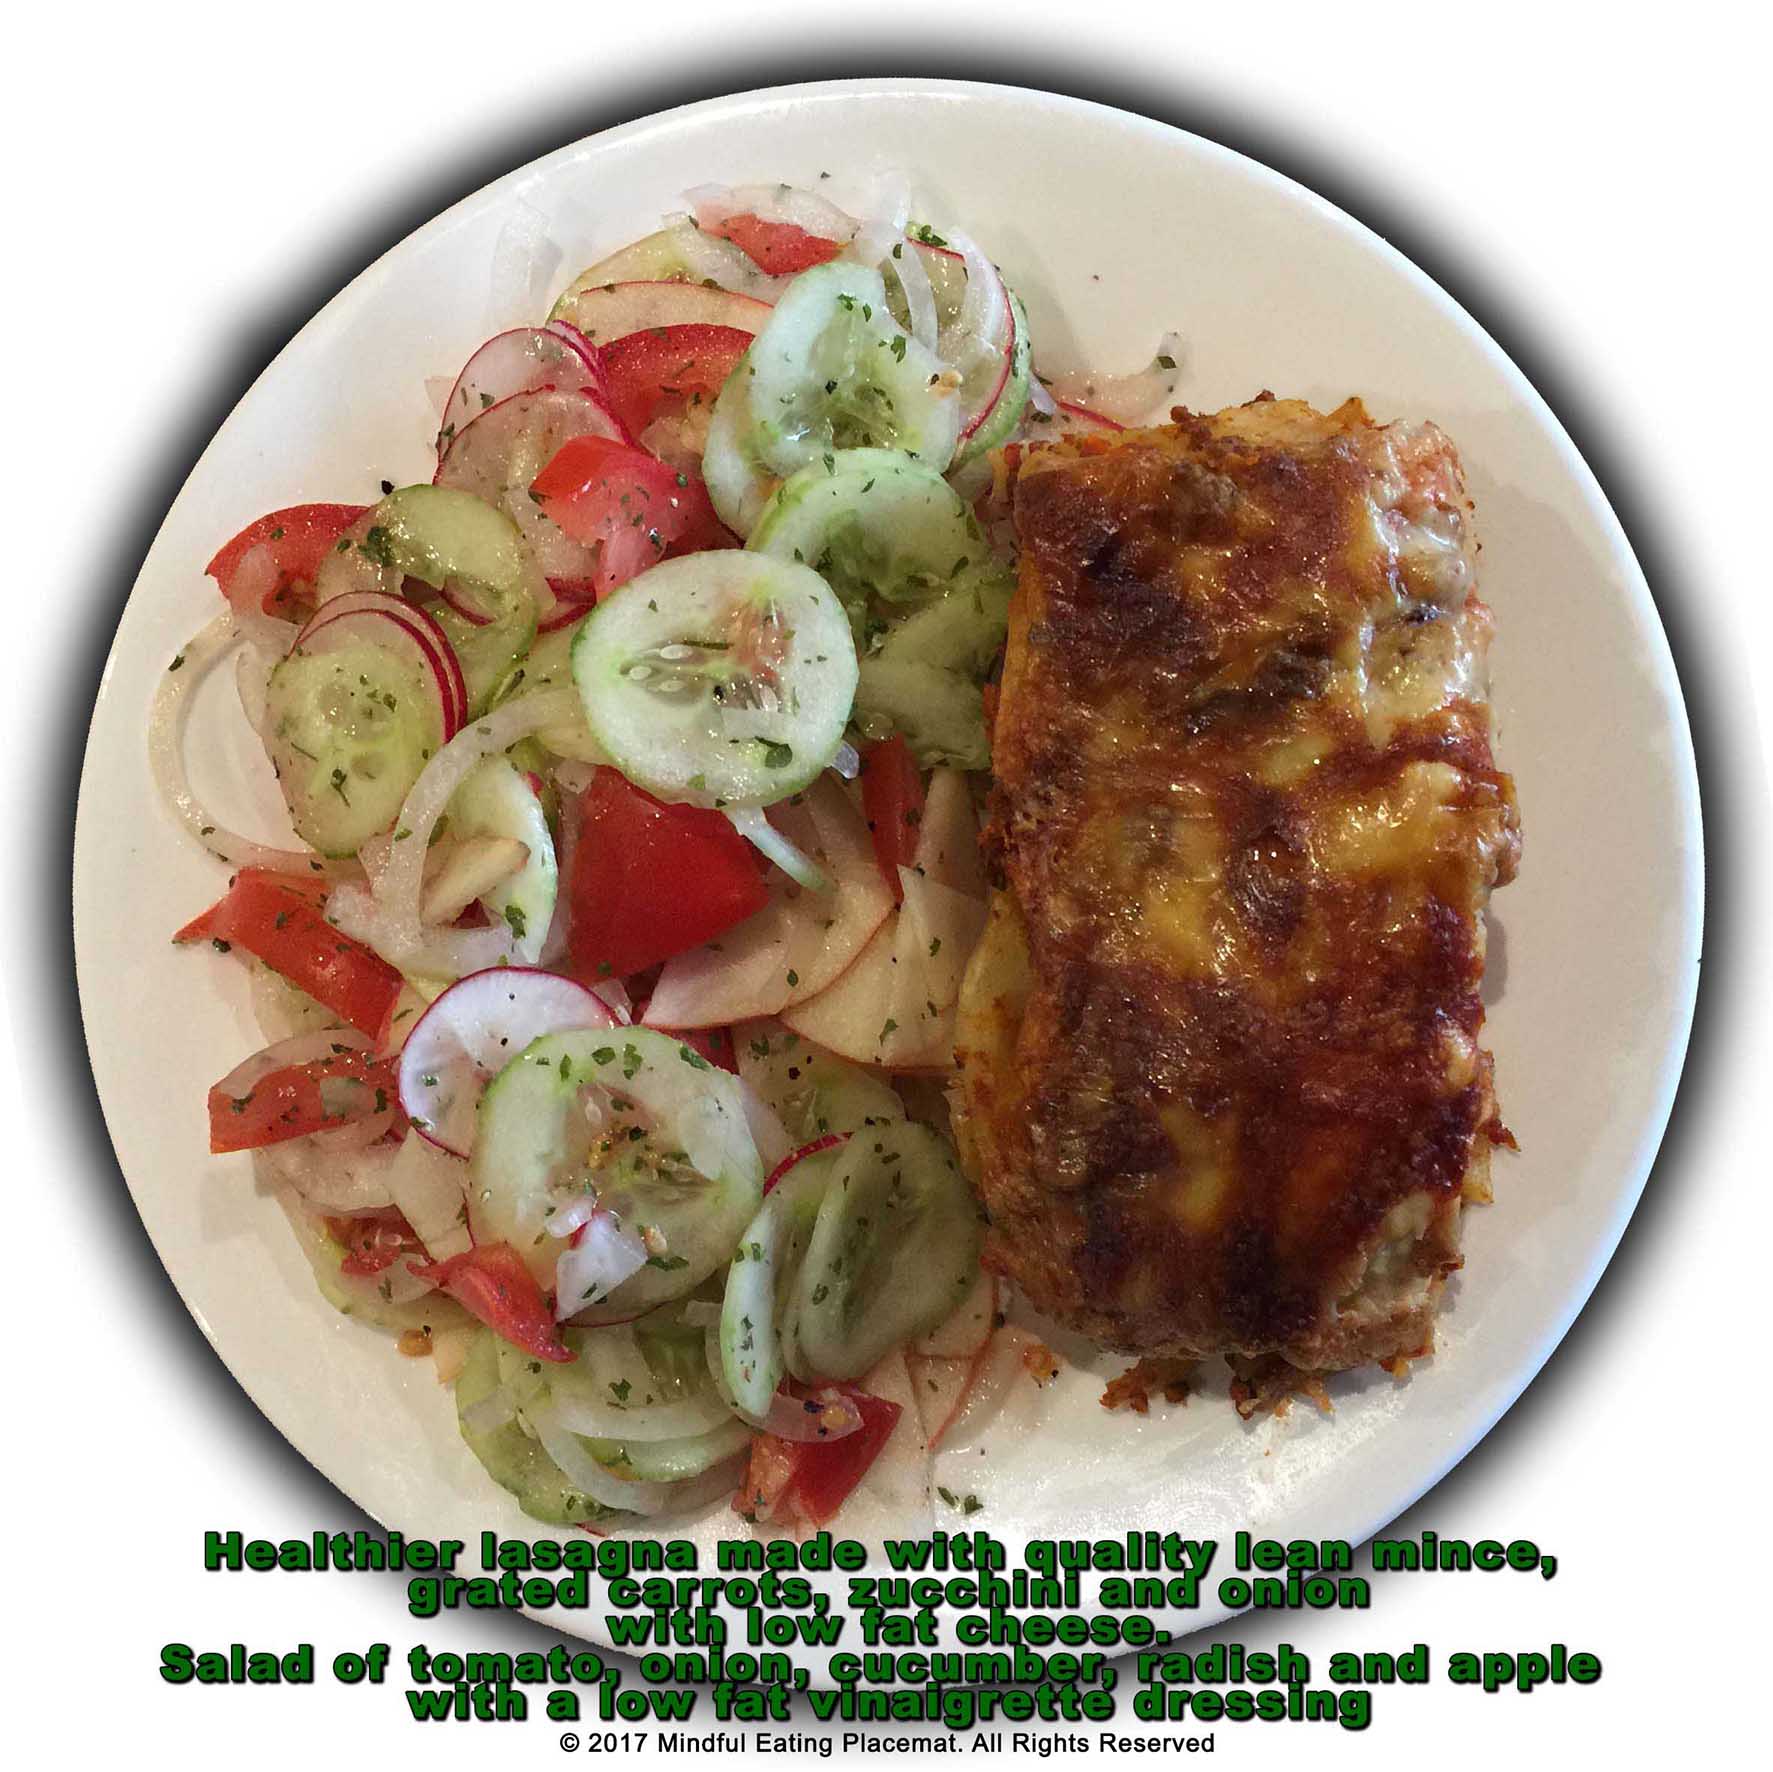 Healthier beef lasagna with cucumber and tomato salad